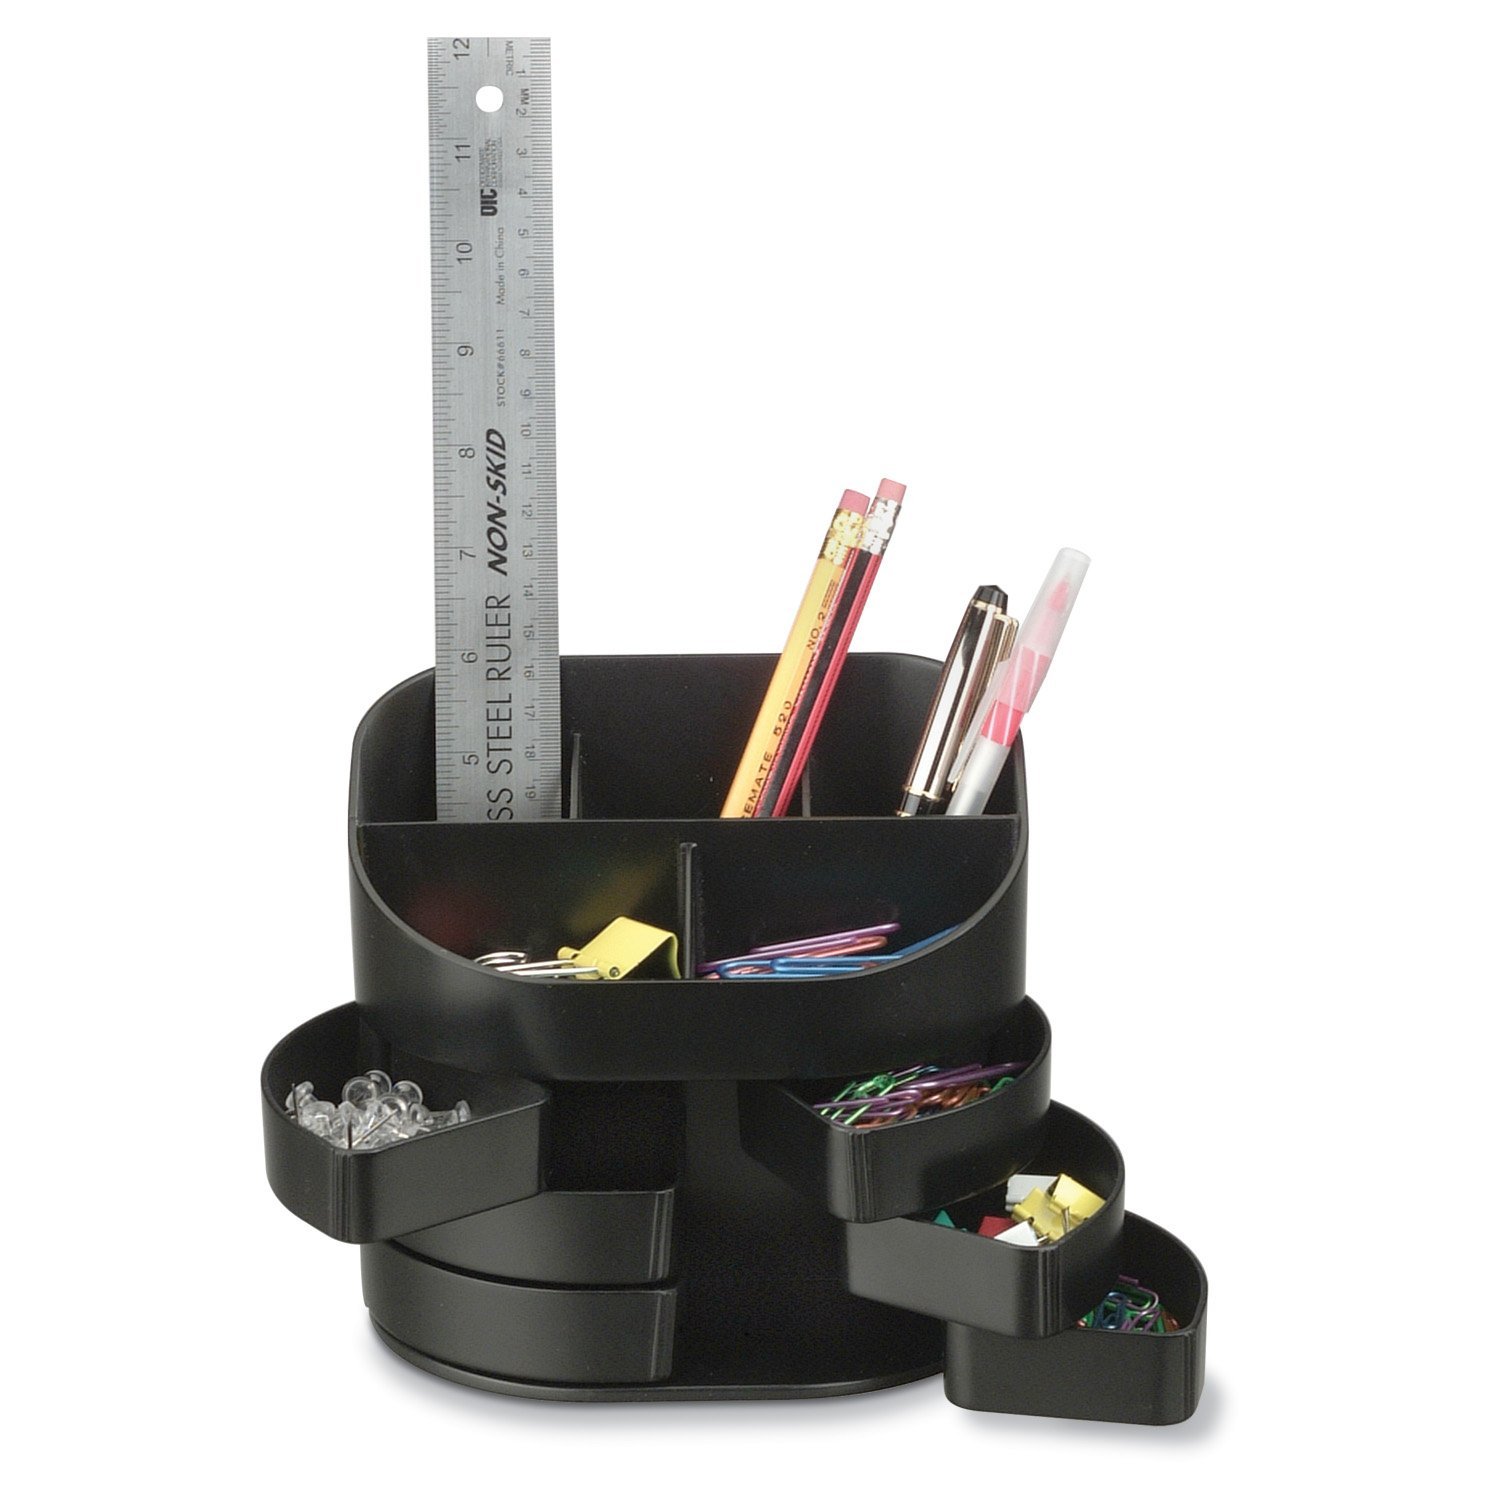 <center>Features 11 compartments including 6 individual swing out drawers, 2 open clip/accessory compartments and 3 stepped compartments for pens/pencils etc.</center>